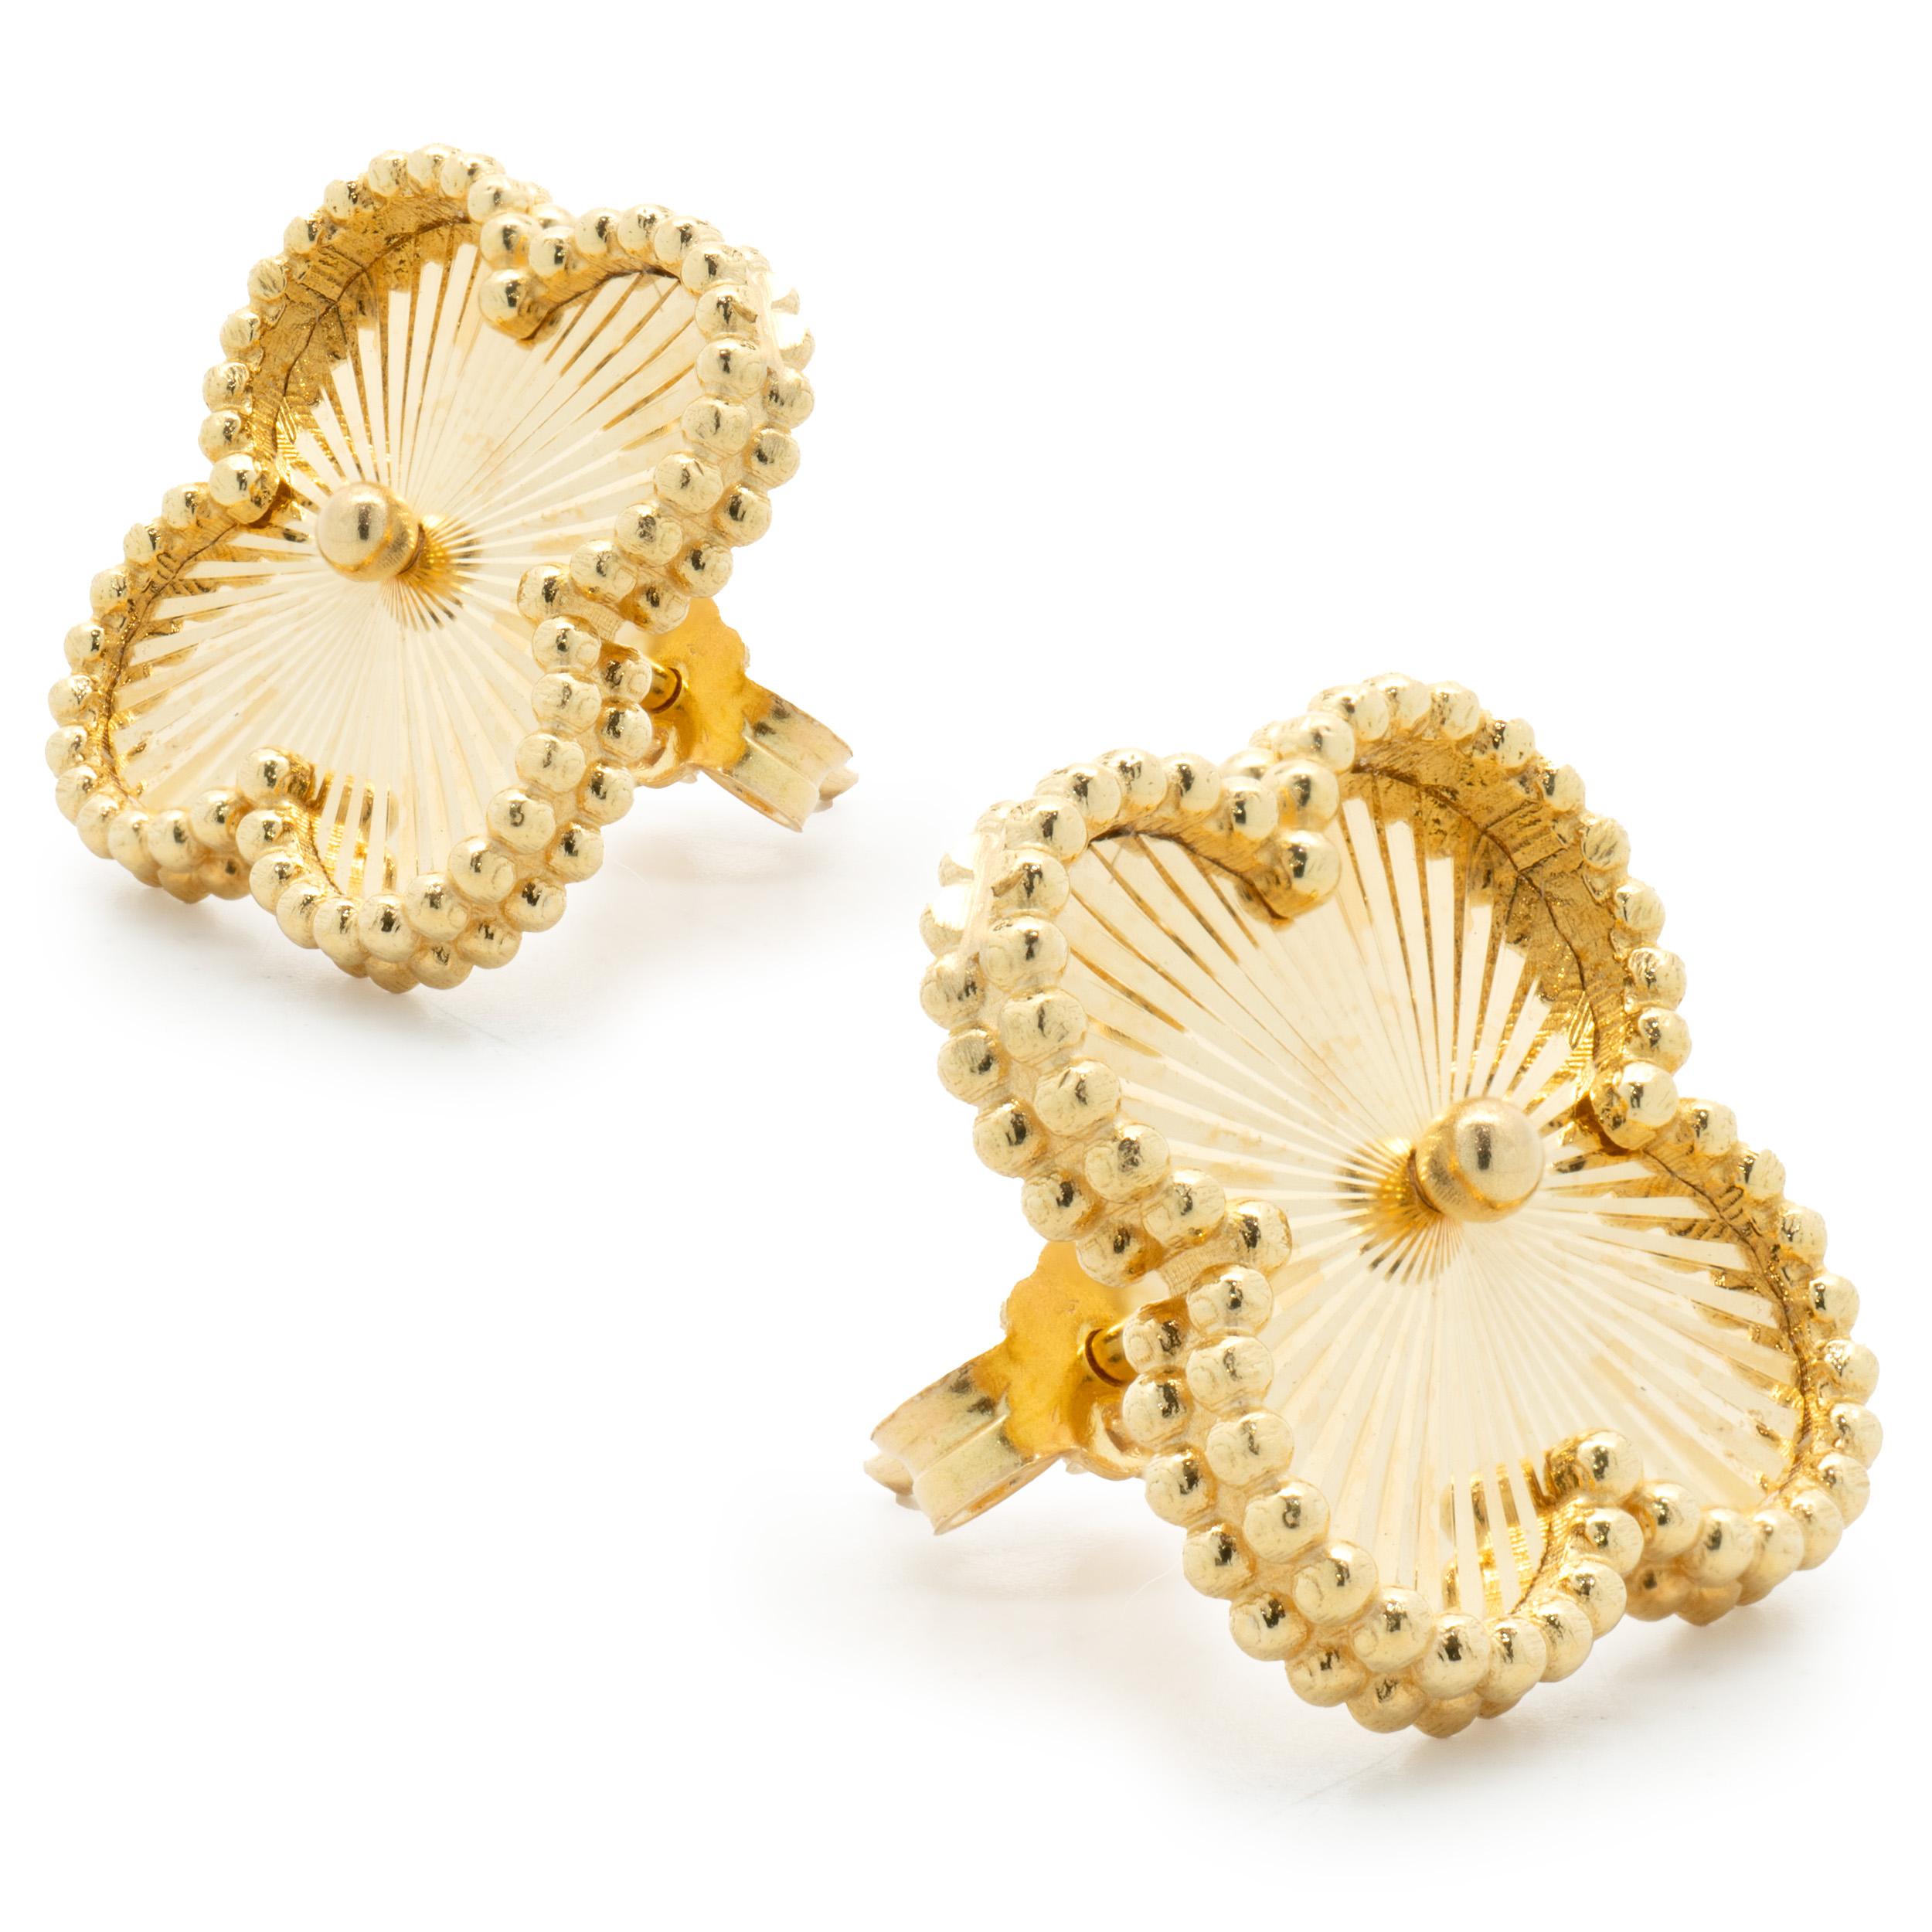 Material: 18K yellow gold
Dimensions: earrings measure 14mm in length
Weight:  5.5 grams